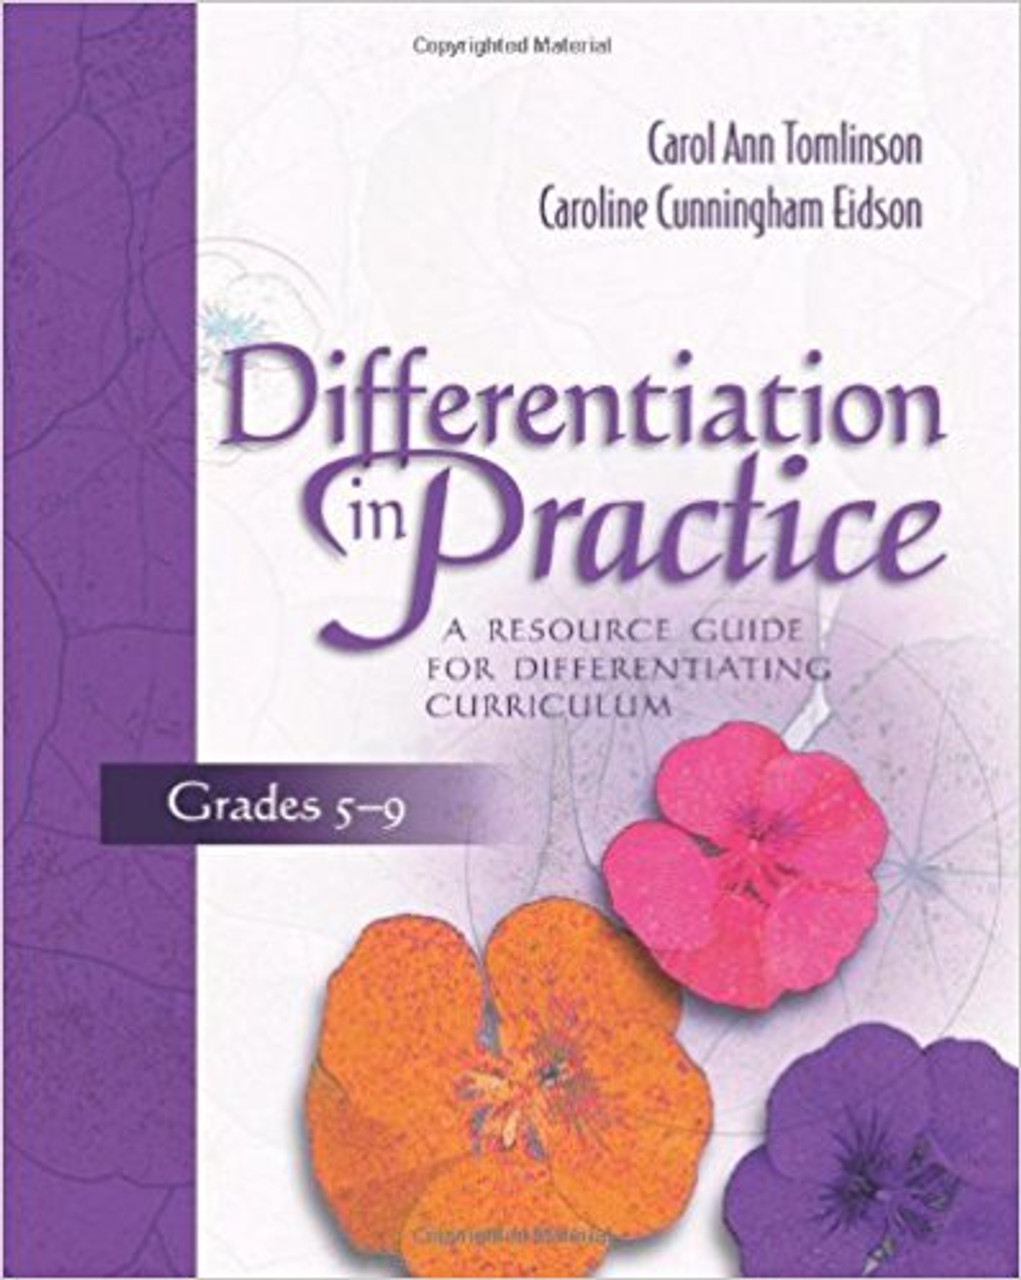 This book is the first in a new series from Carol Ann Tomlinson and Caroline Cunningham Eidson exploring how real teachers incorporate differentiation principles and strategies throughout an entire instructional unit. 